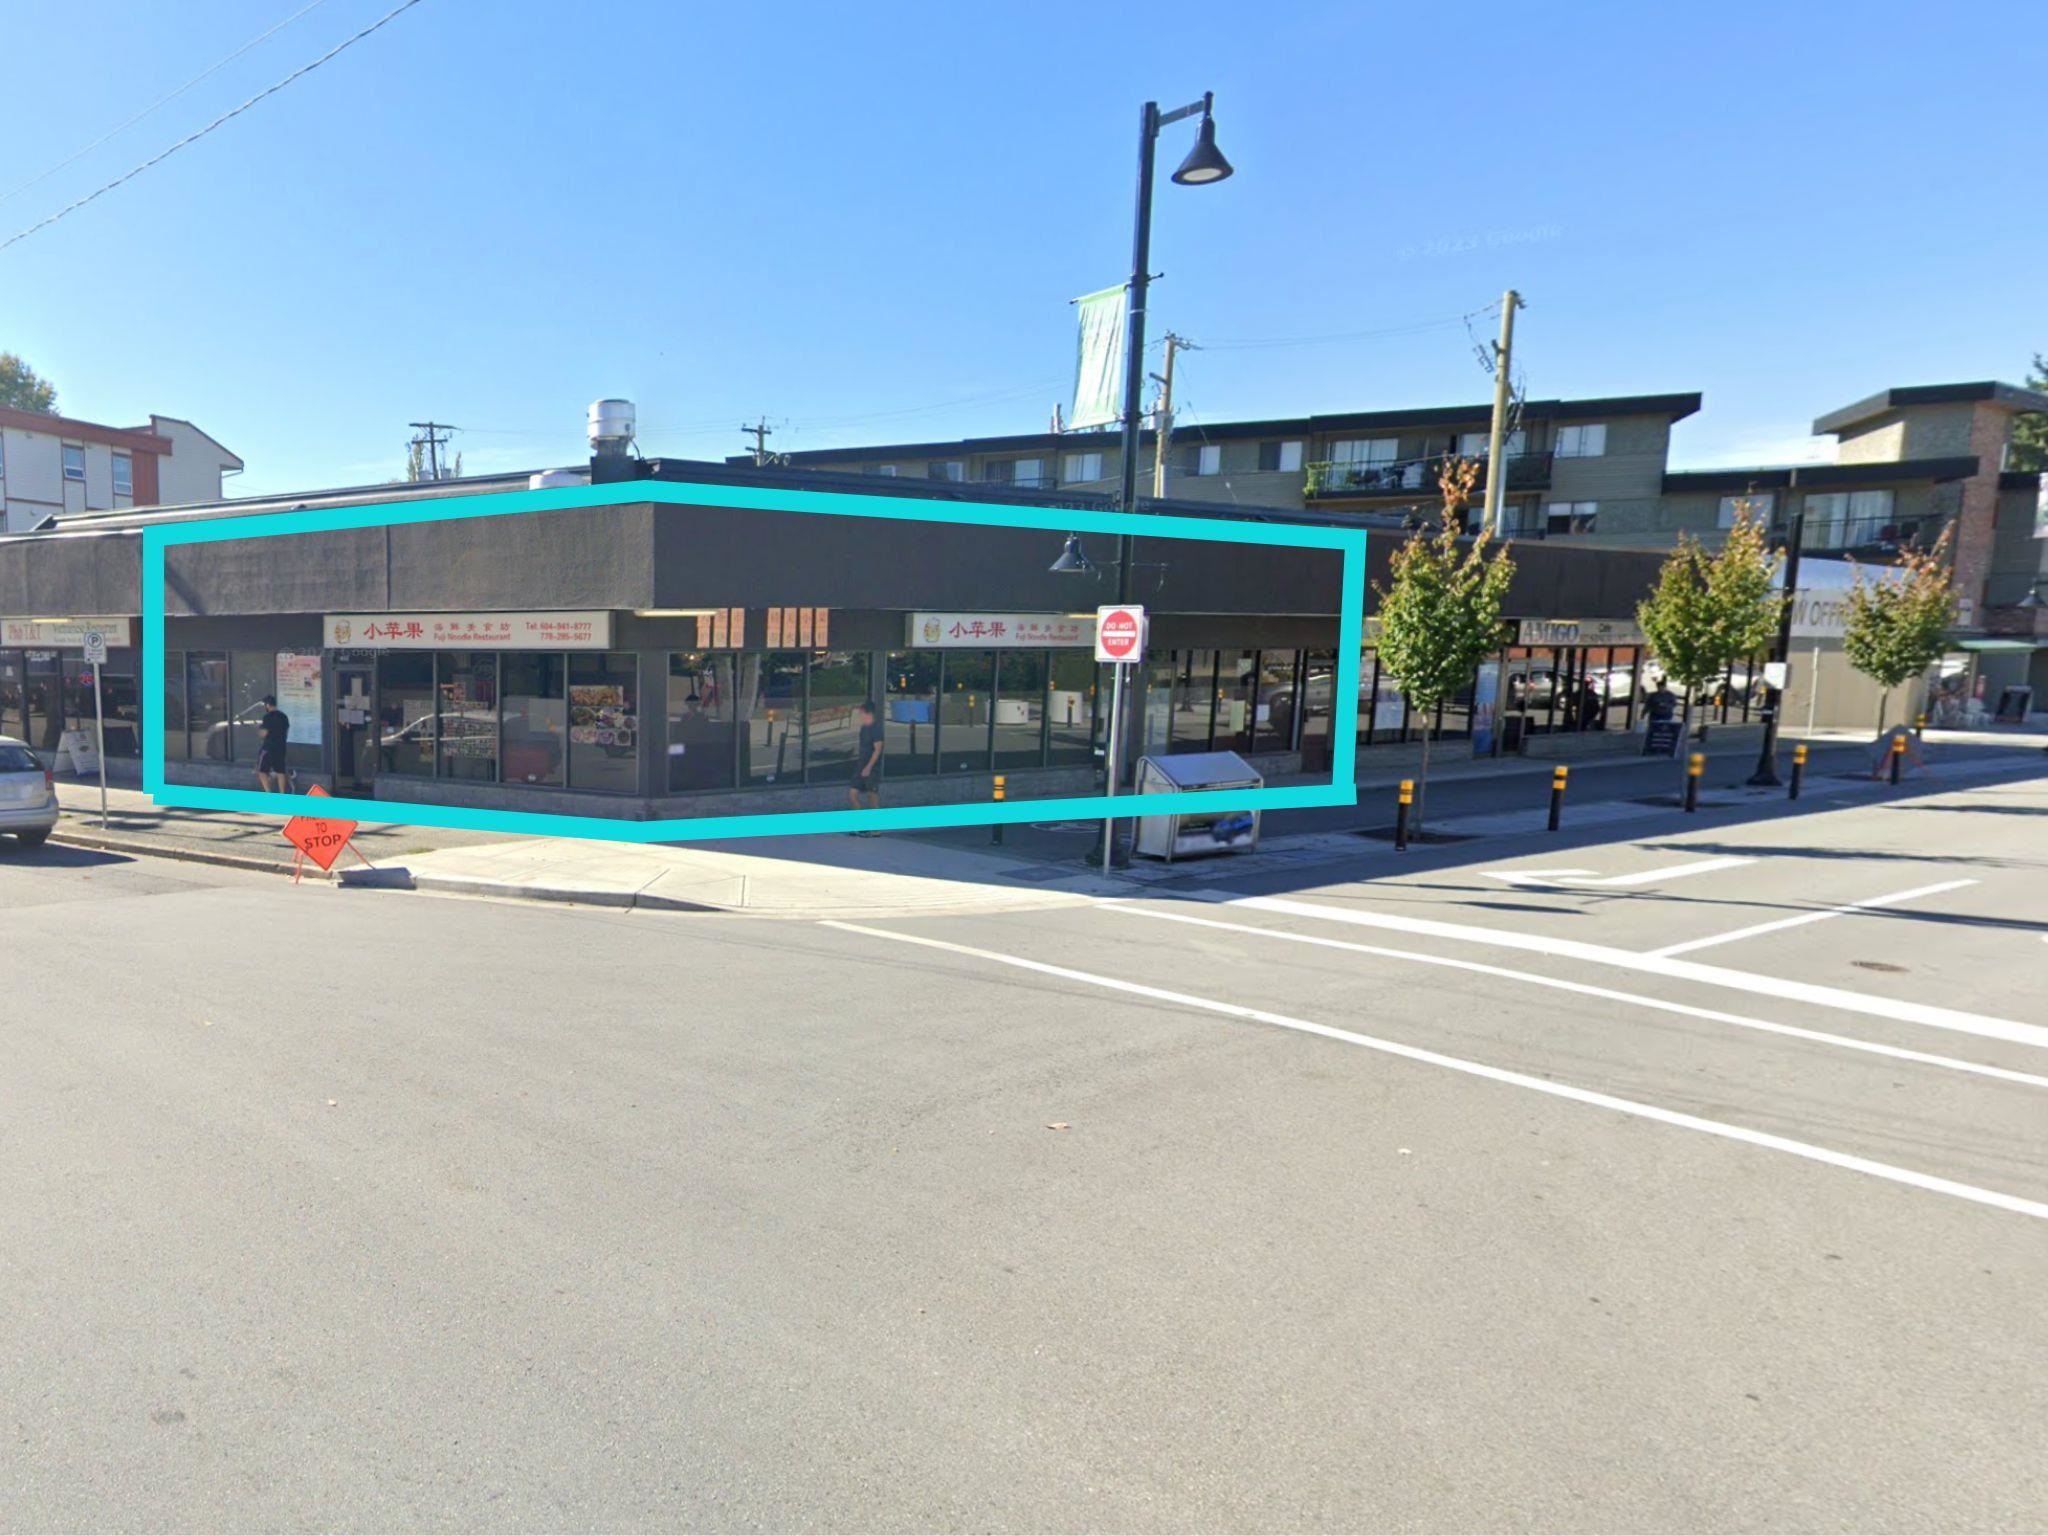 Central Pt Coquitlam Land Commercial for sale:    (Listed 6800-05-14)